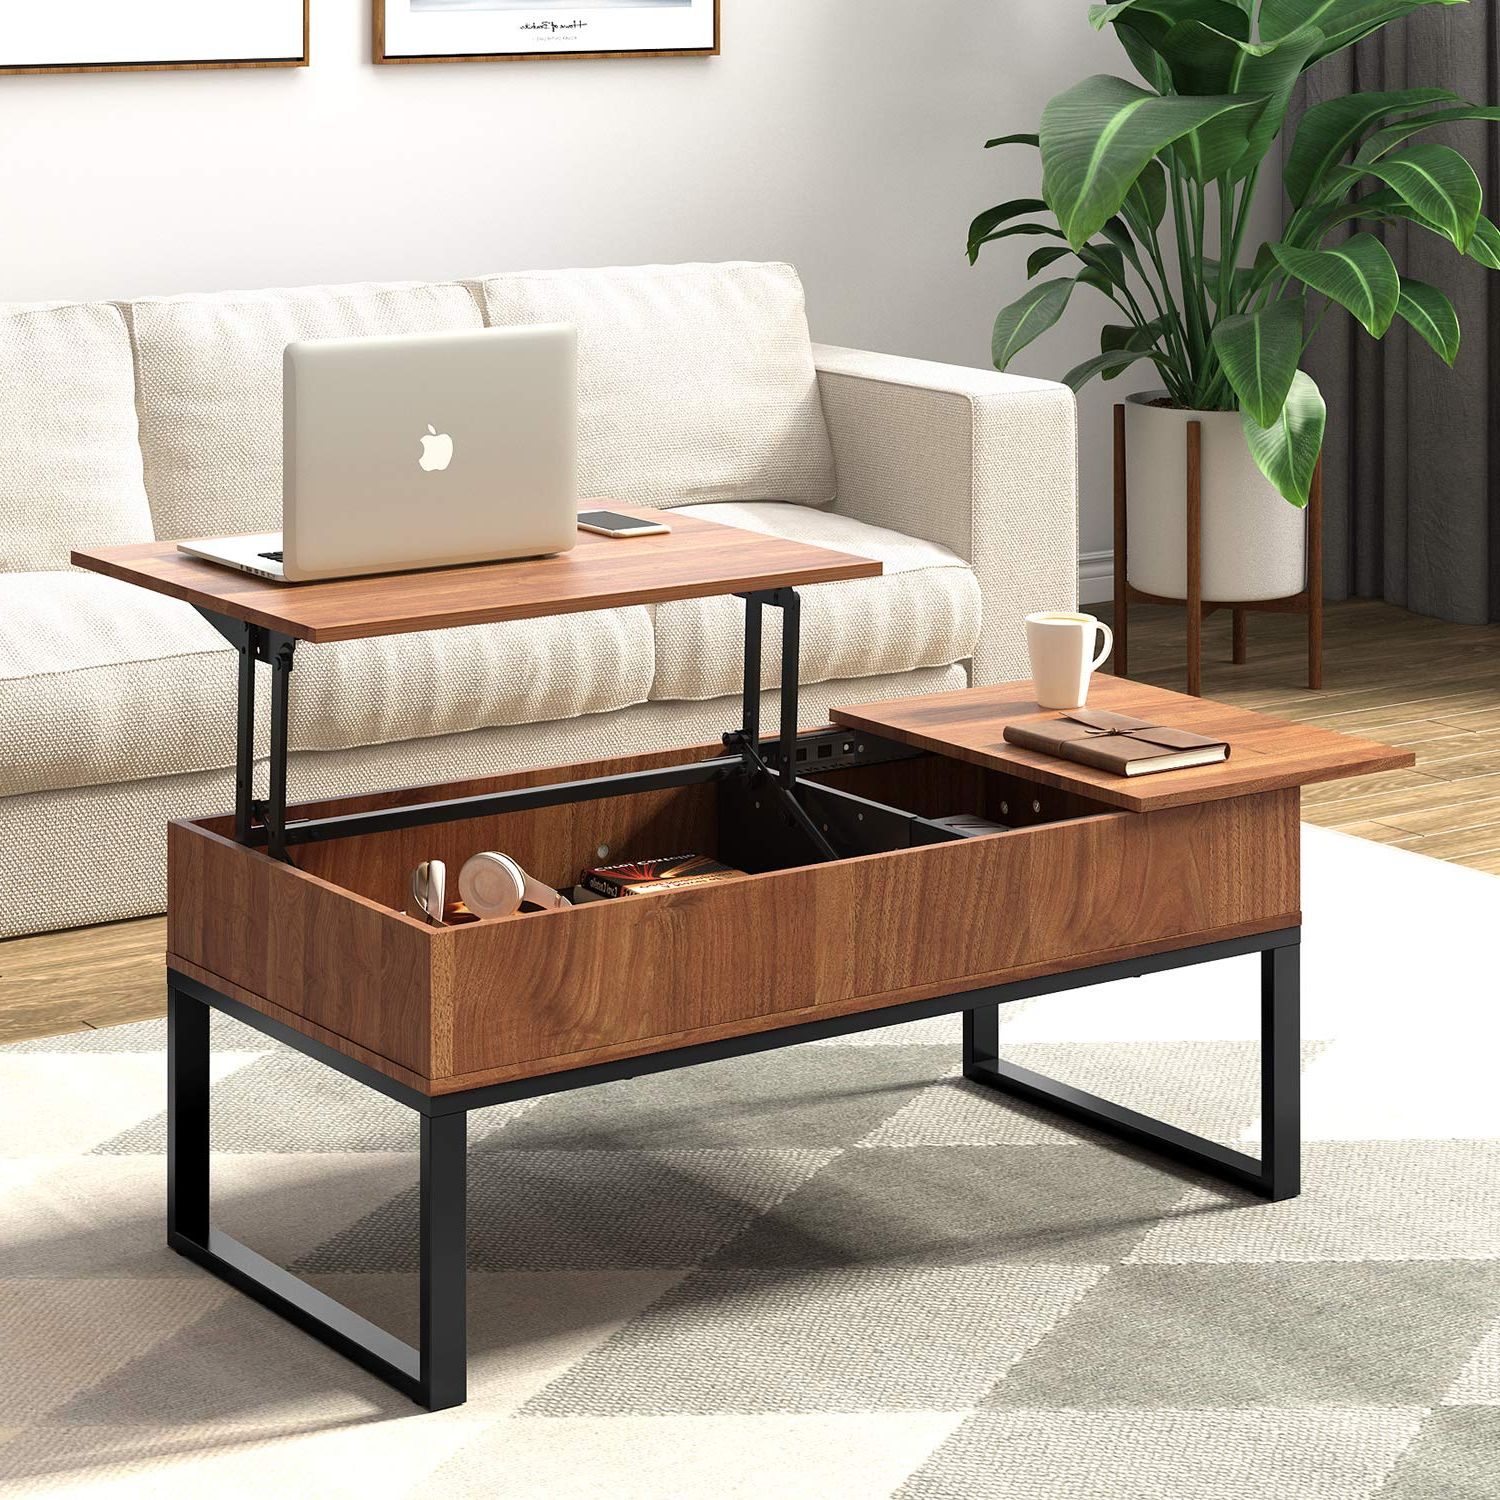 Wlive Wood Coffee Table With Adjustable Lift Top Table, Metal Frame Within Current Espresso Wood Adjustable Reading Tables (View 13 of 15)